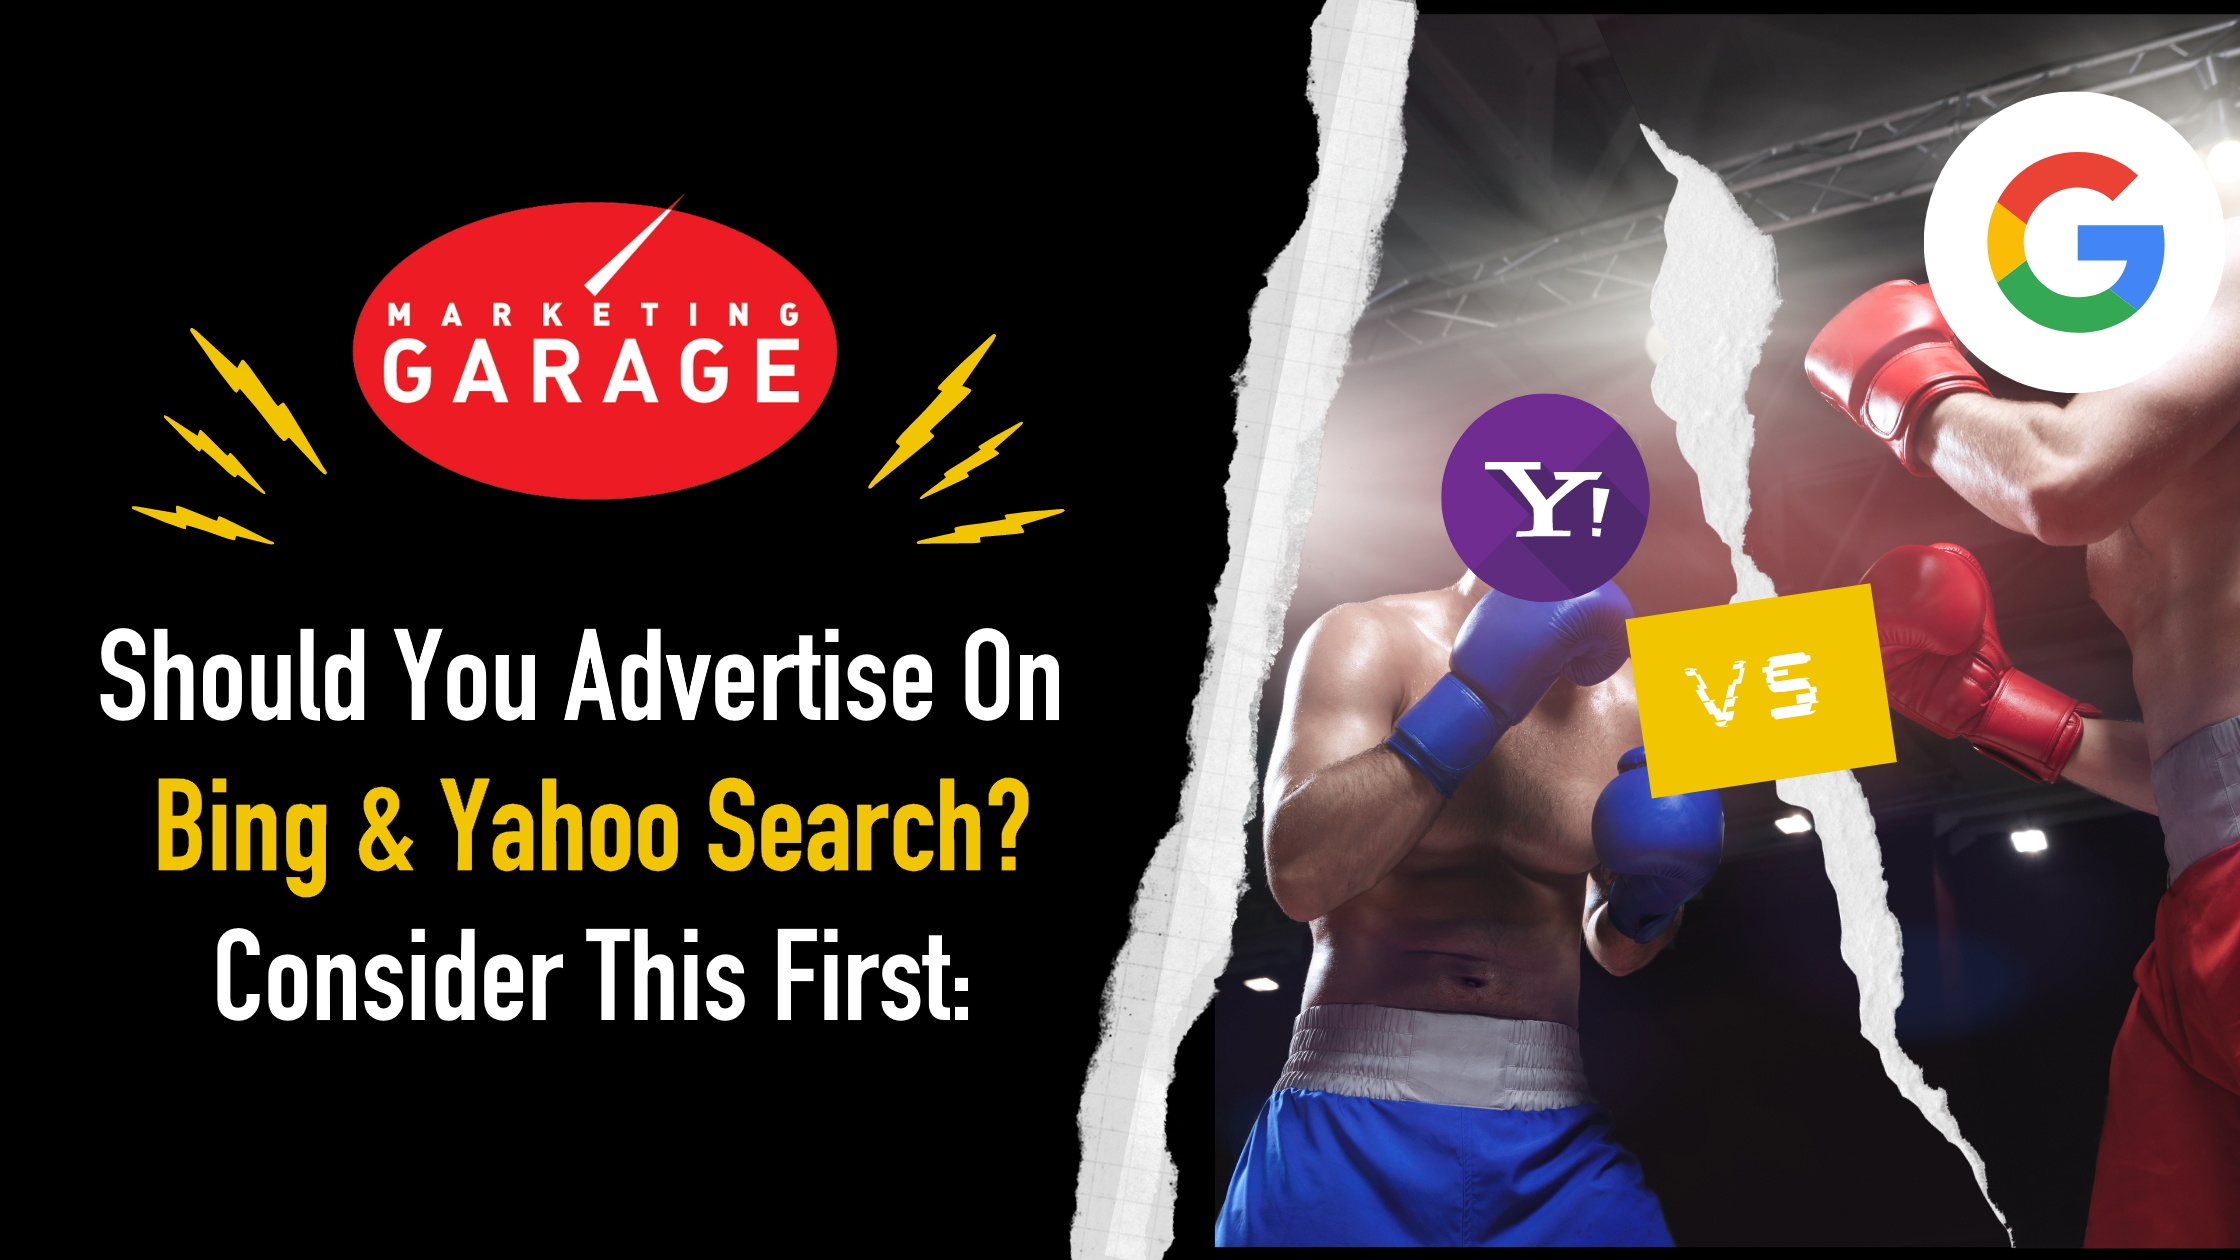 What made Yahoo so successful?